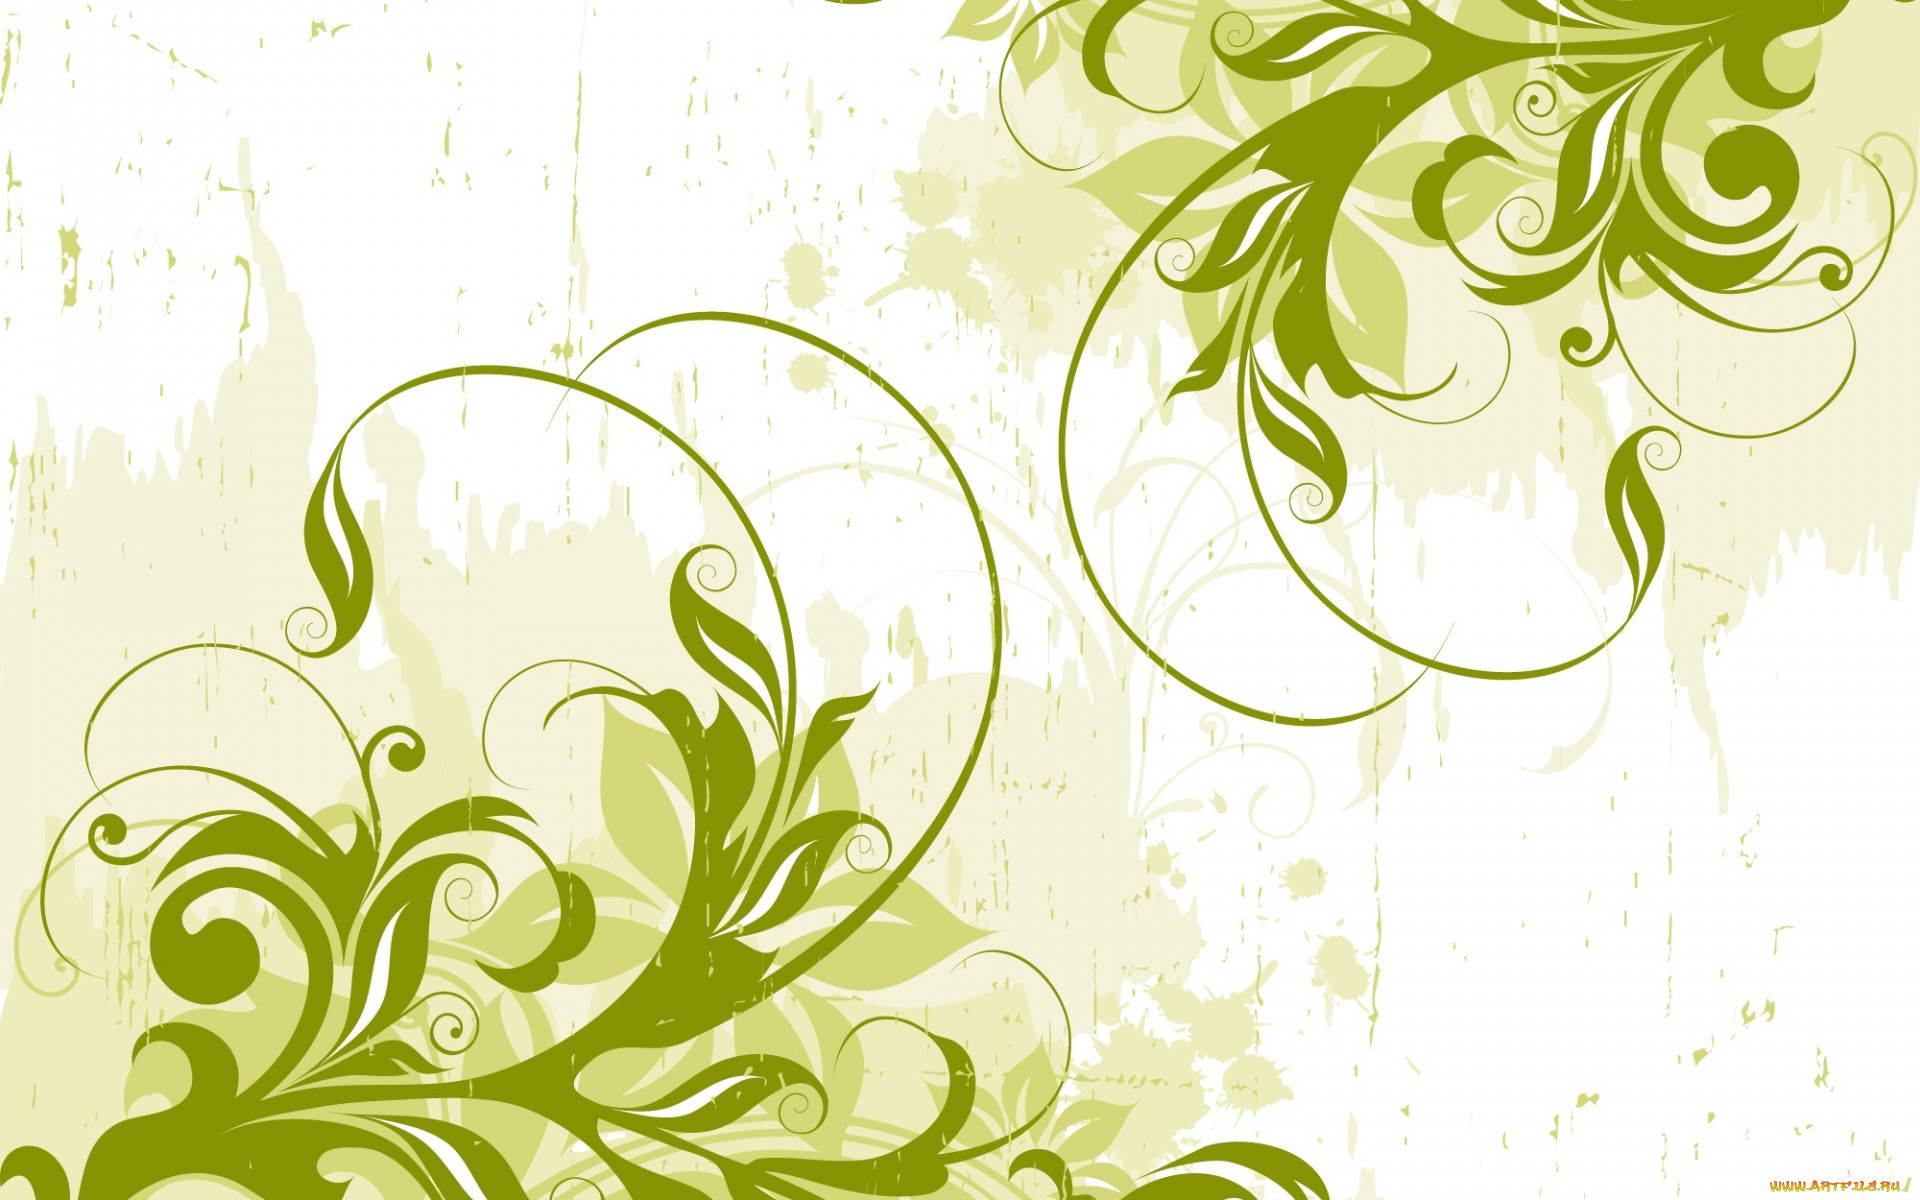  ,  , graphics, vector, background, design, green, abstract